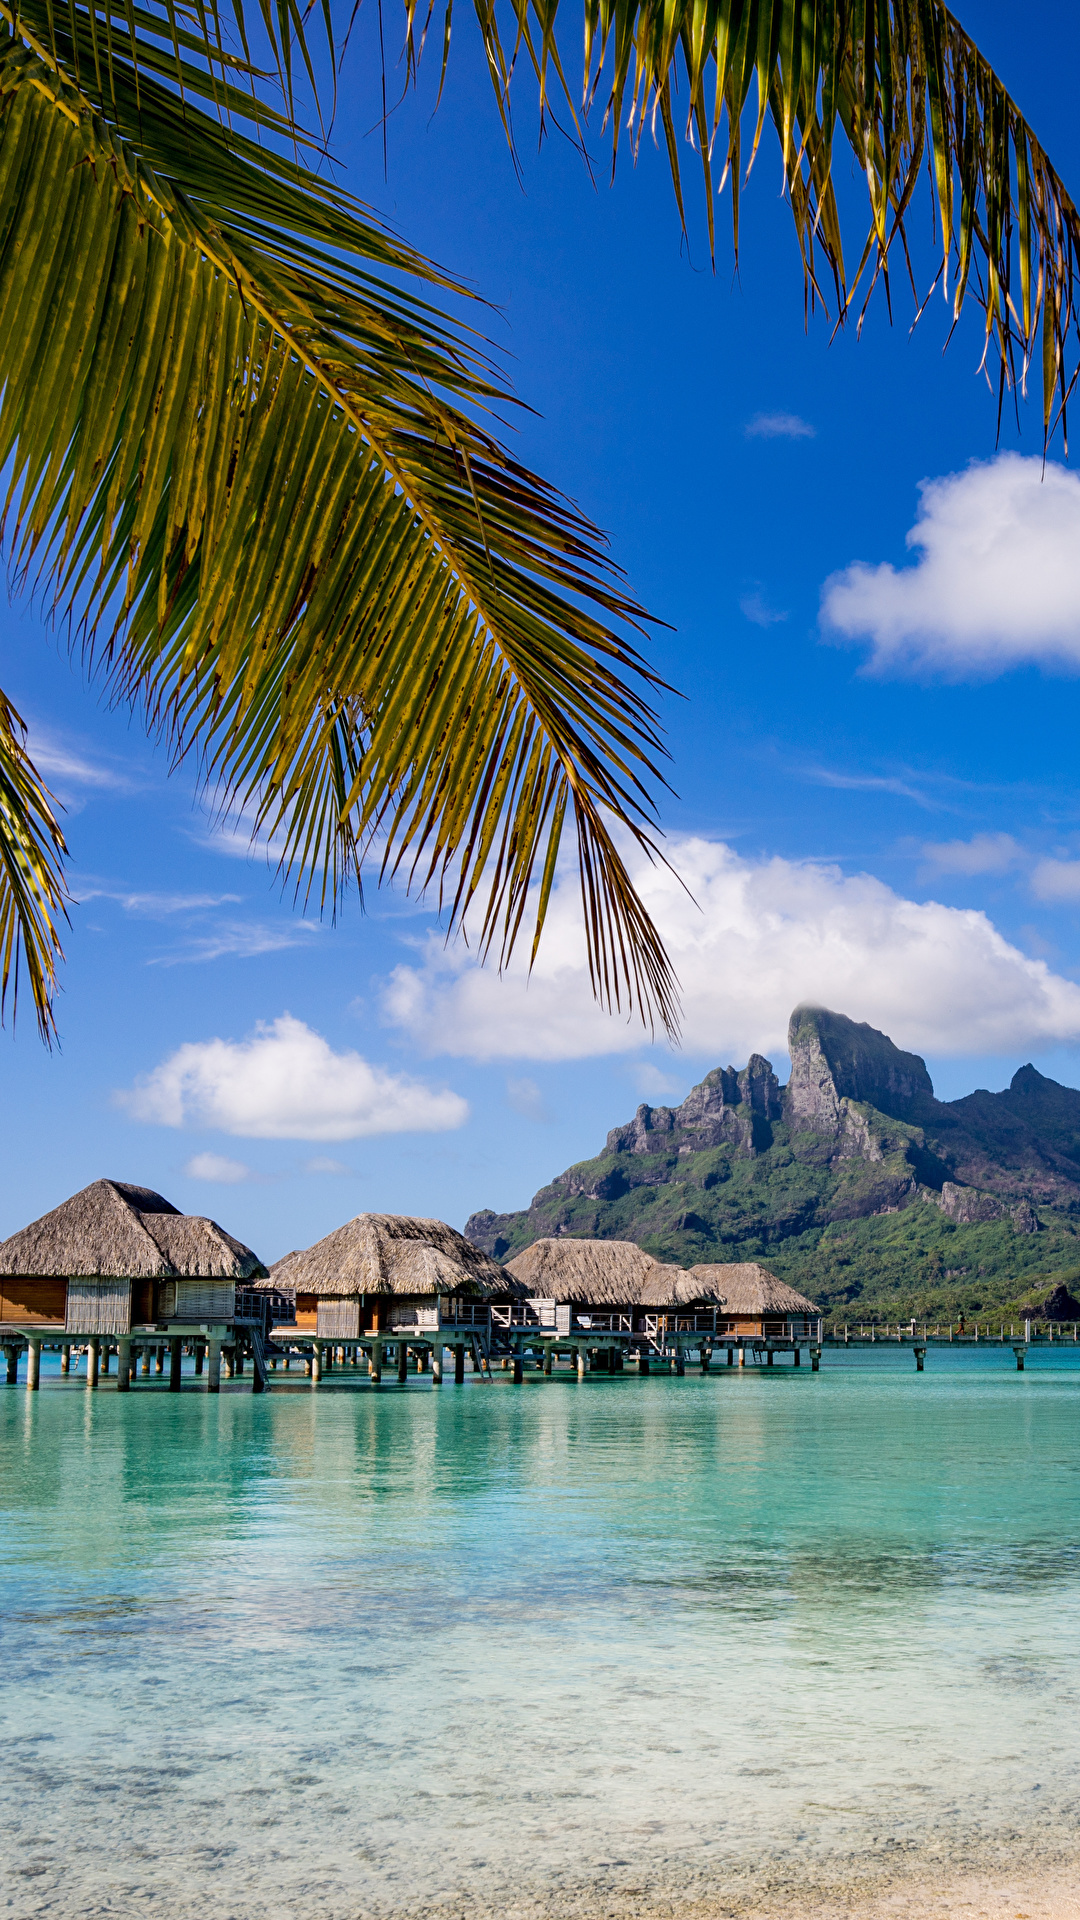 Bora Bora: French Polynesia, One of the unique tropical locations in the world. 1080x1920 Full HD Background.